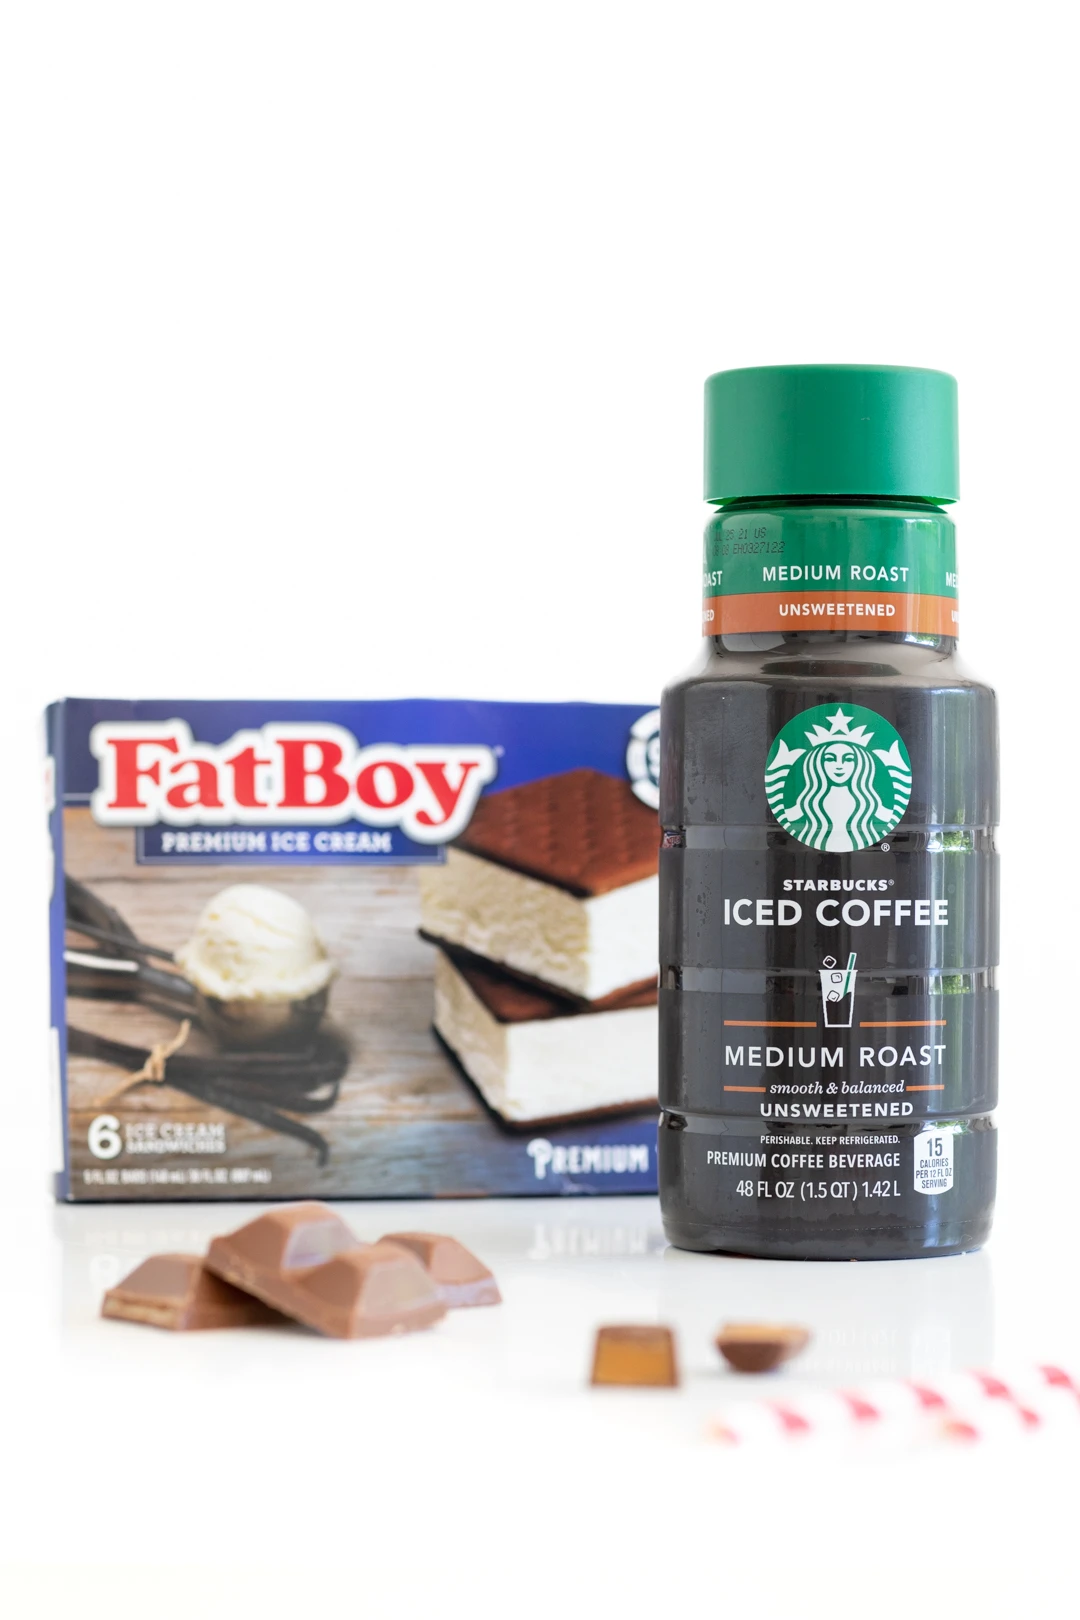 starbucks store bought iced coffee and fat boy ice cream sandwiches in the product box